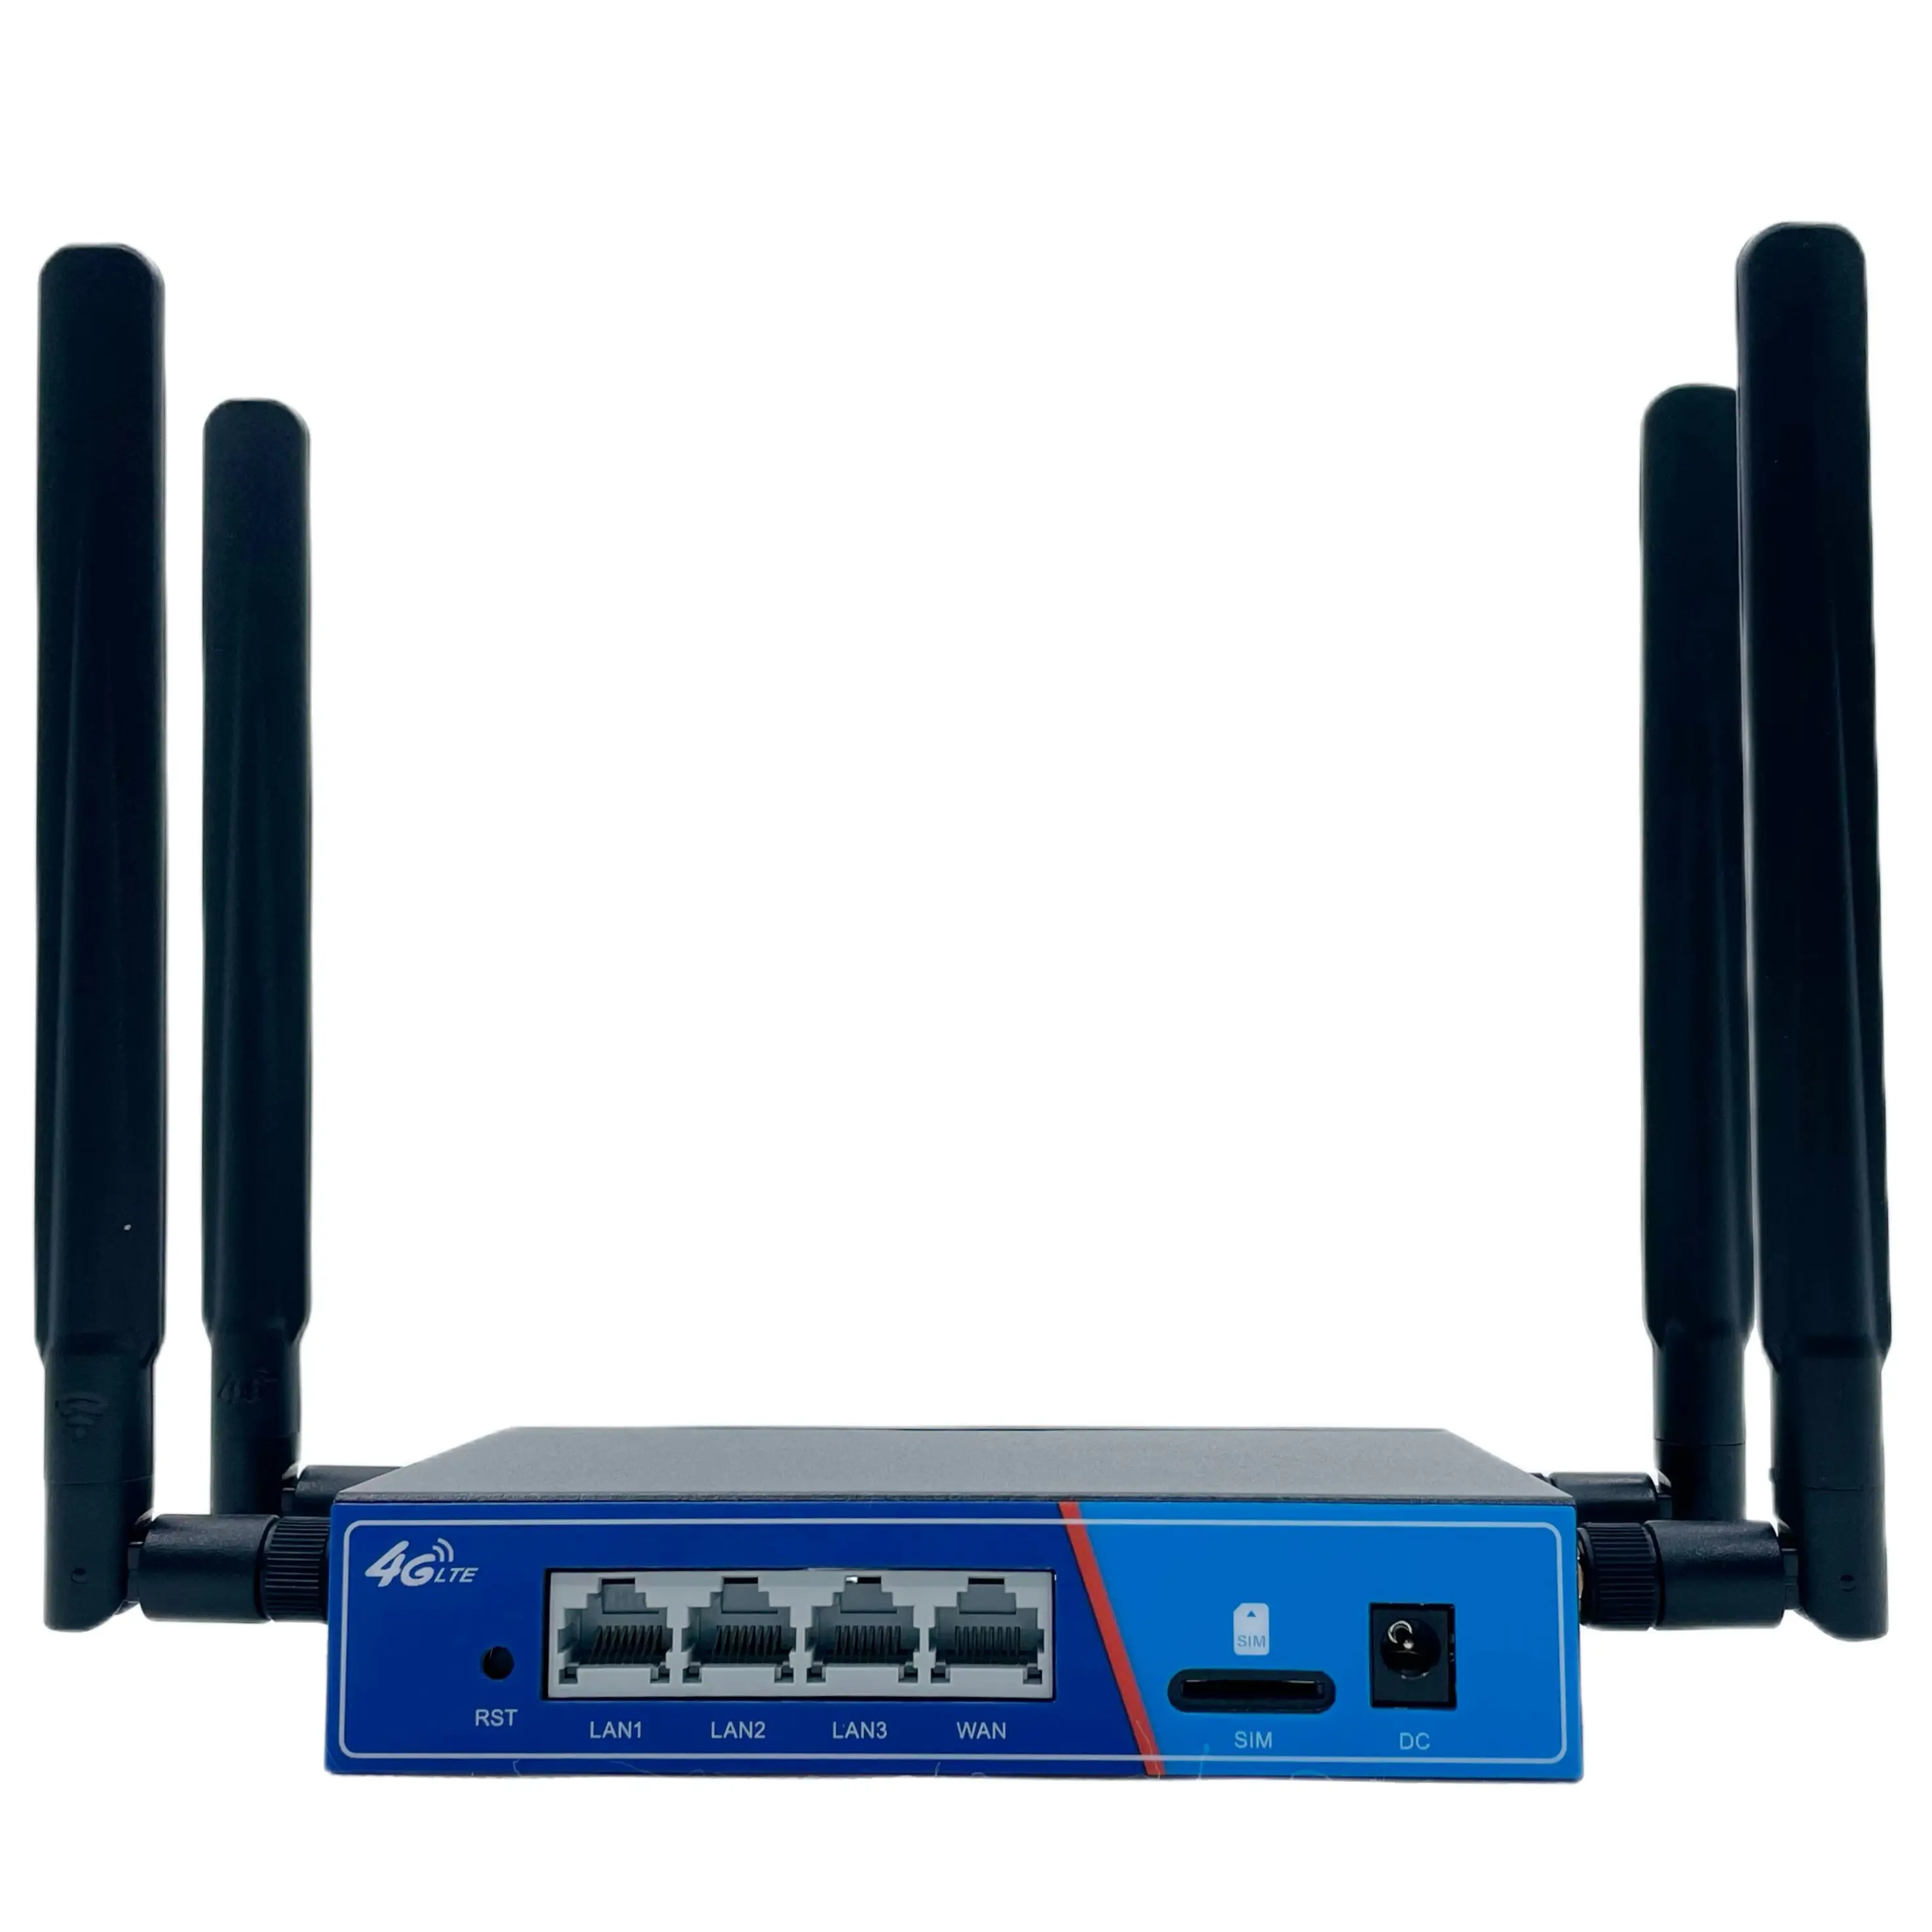 4g lte router for bus WIFI 3G 4G wireless Modem industrial with GPS and remote management platform input EP06